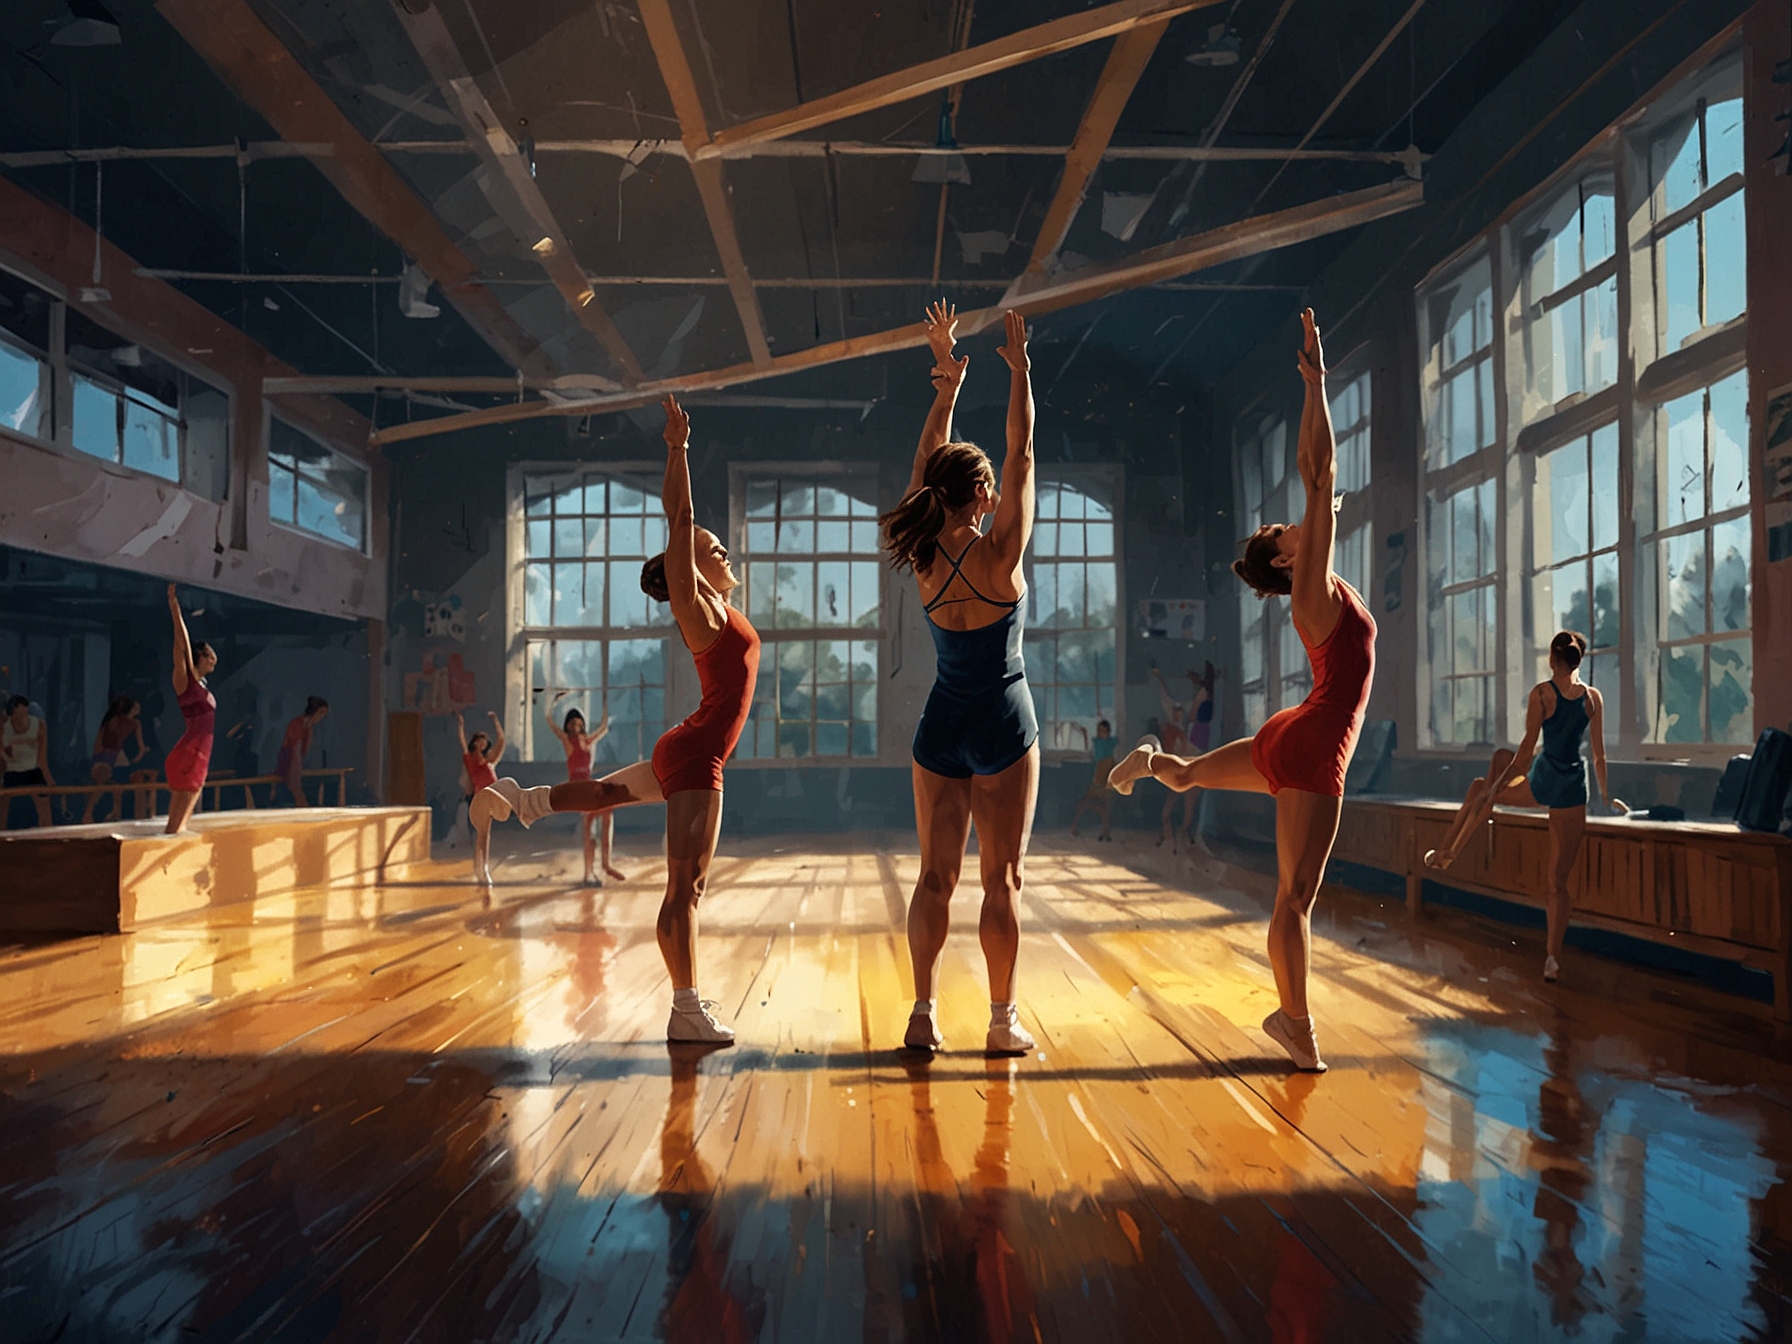 A group of female gymnasts practice their routines in a brightly lit gym, symbolizing the new professional opportunities they will have to continue their careers beyond college.